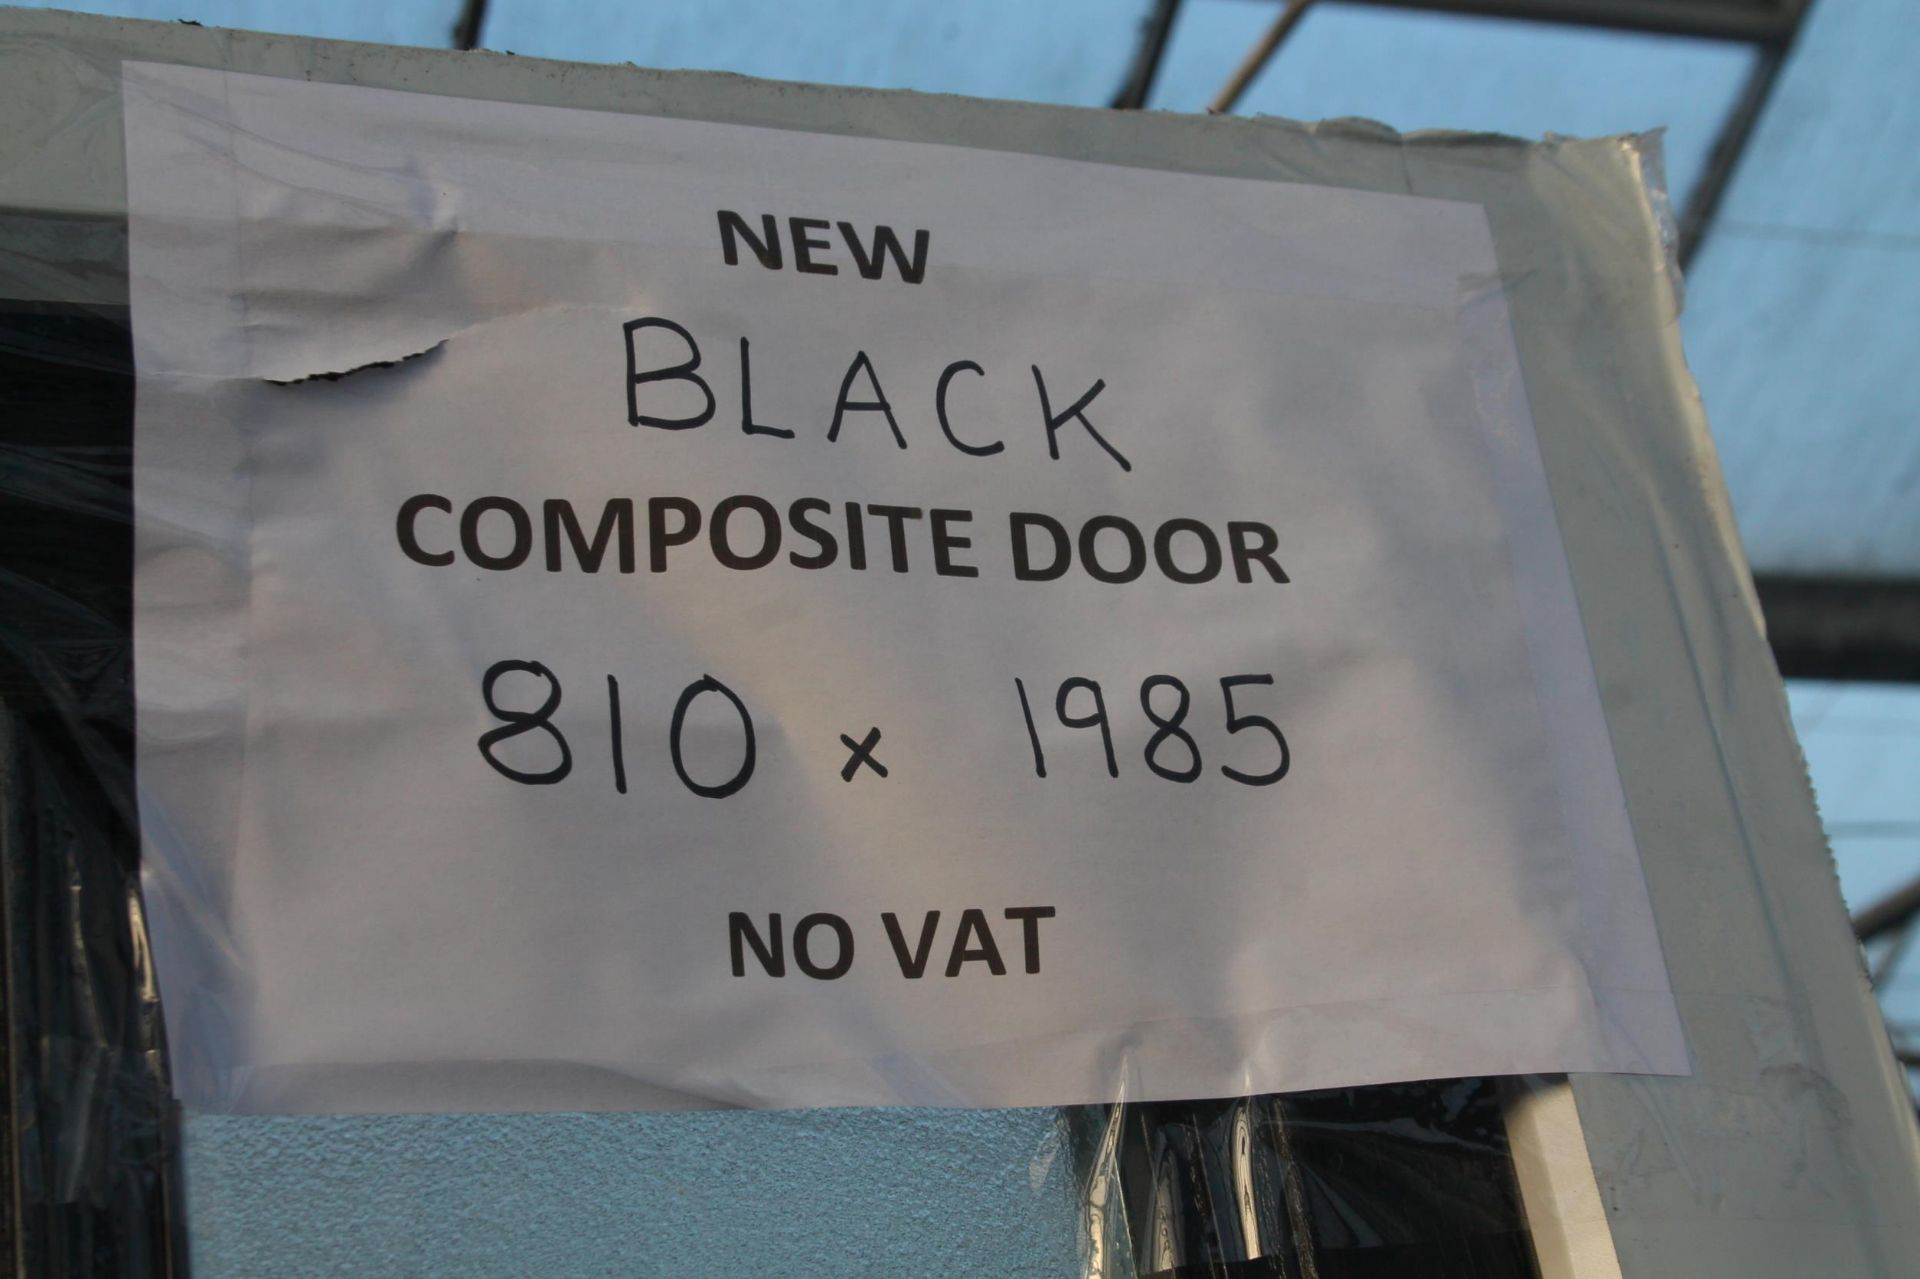 A NEW BLACK COMPOSITE DOOR AND FRAME 810MM X 1985MM LOCK AND KEYS IN LETTERBOX NO VAT - Bild 3 aus 3